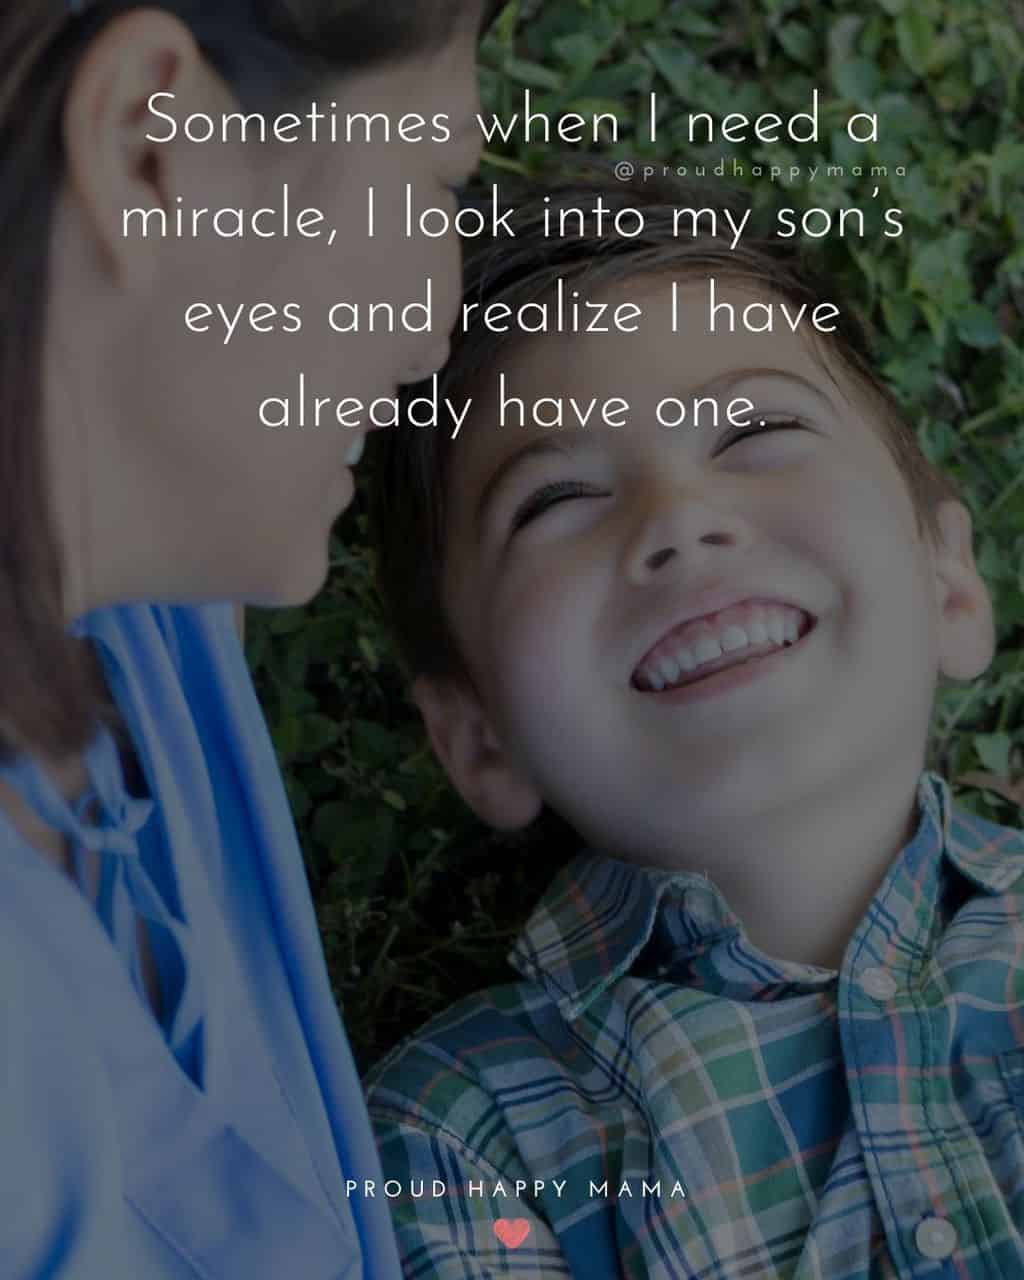 Son Quotes - Sometimes when I need a miracle, I look into my son’s eyes and realize I have already have one.’